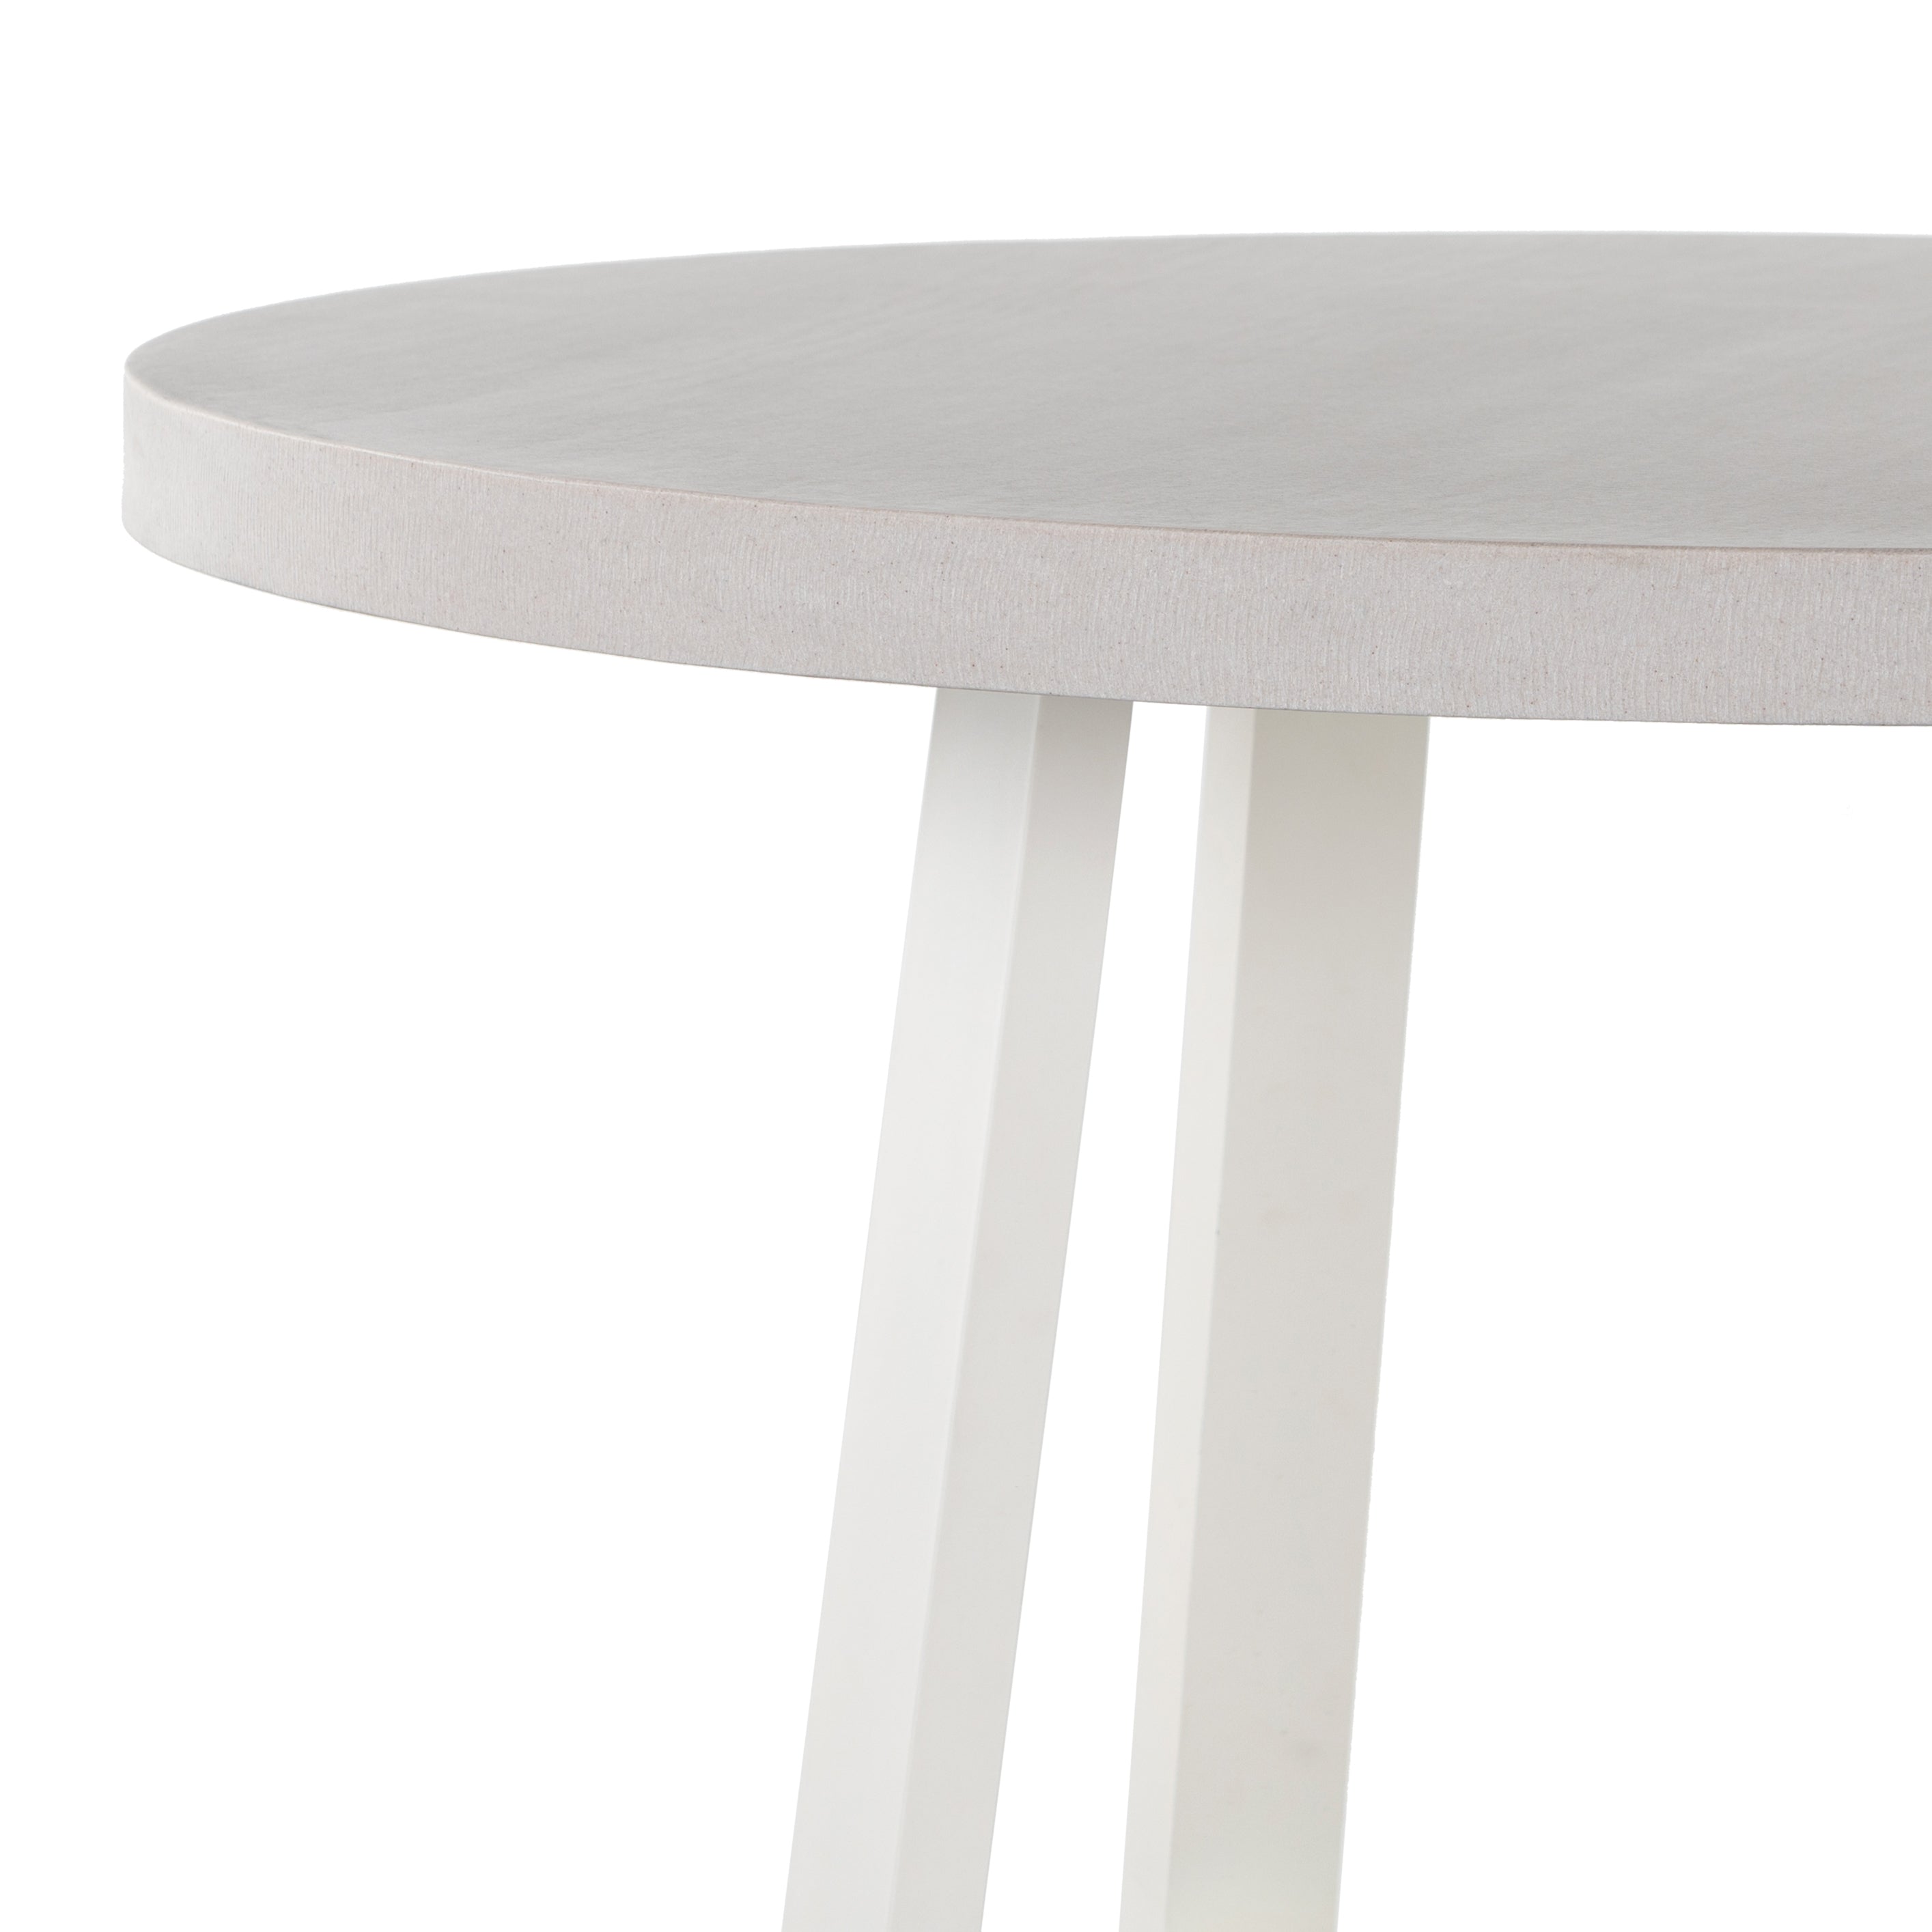 Cyrus Outdoor Round Dining Table